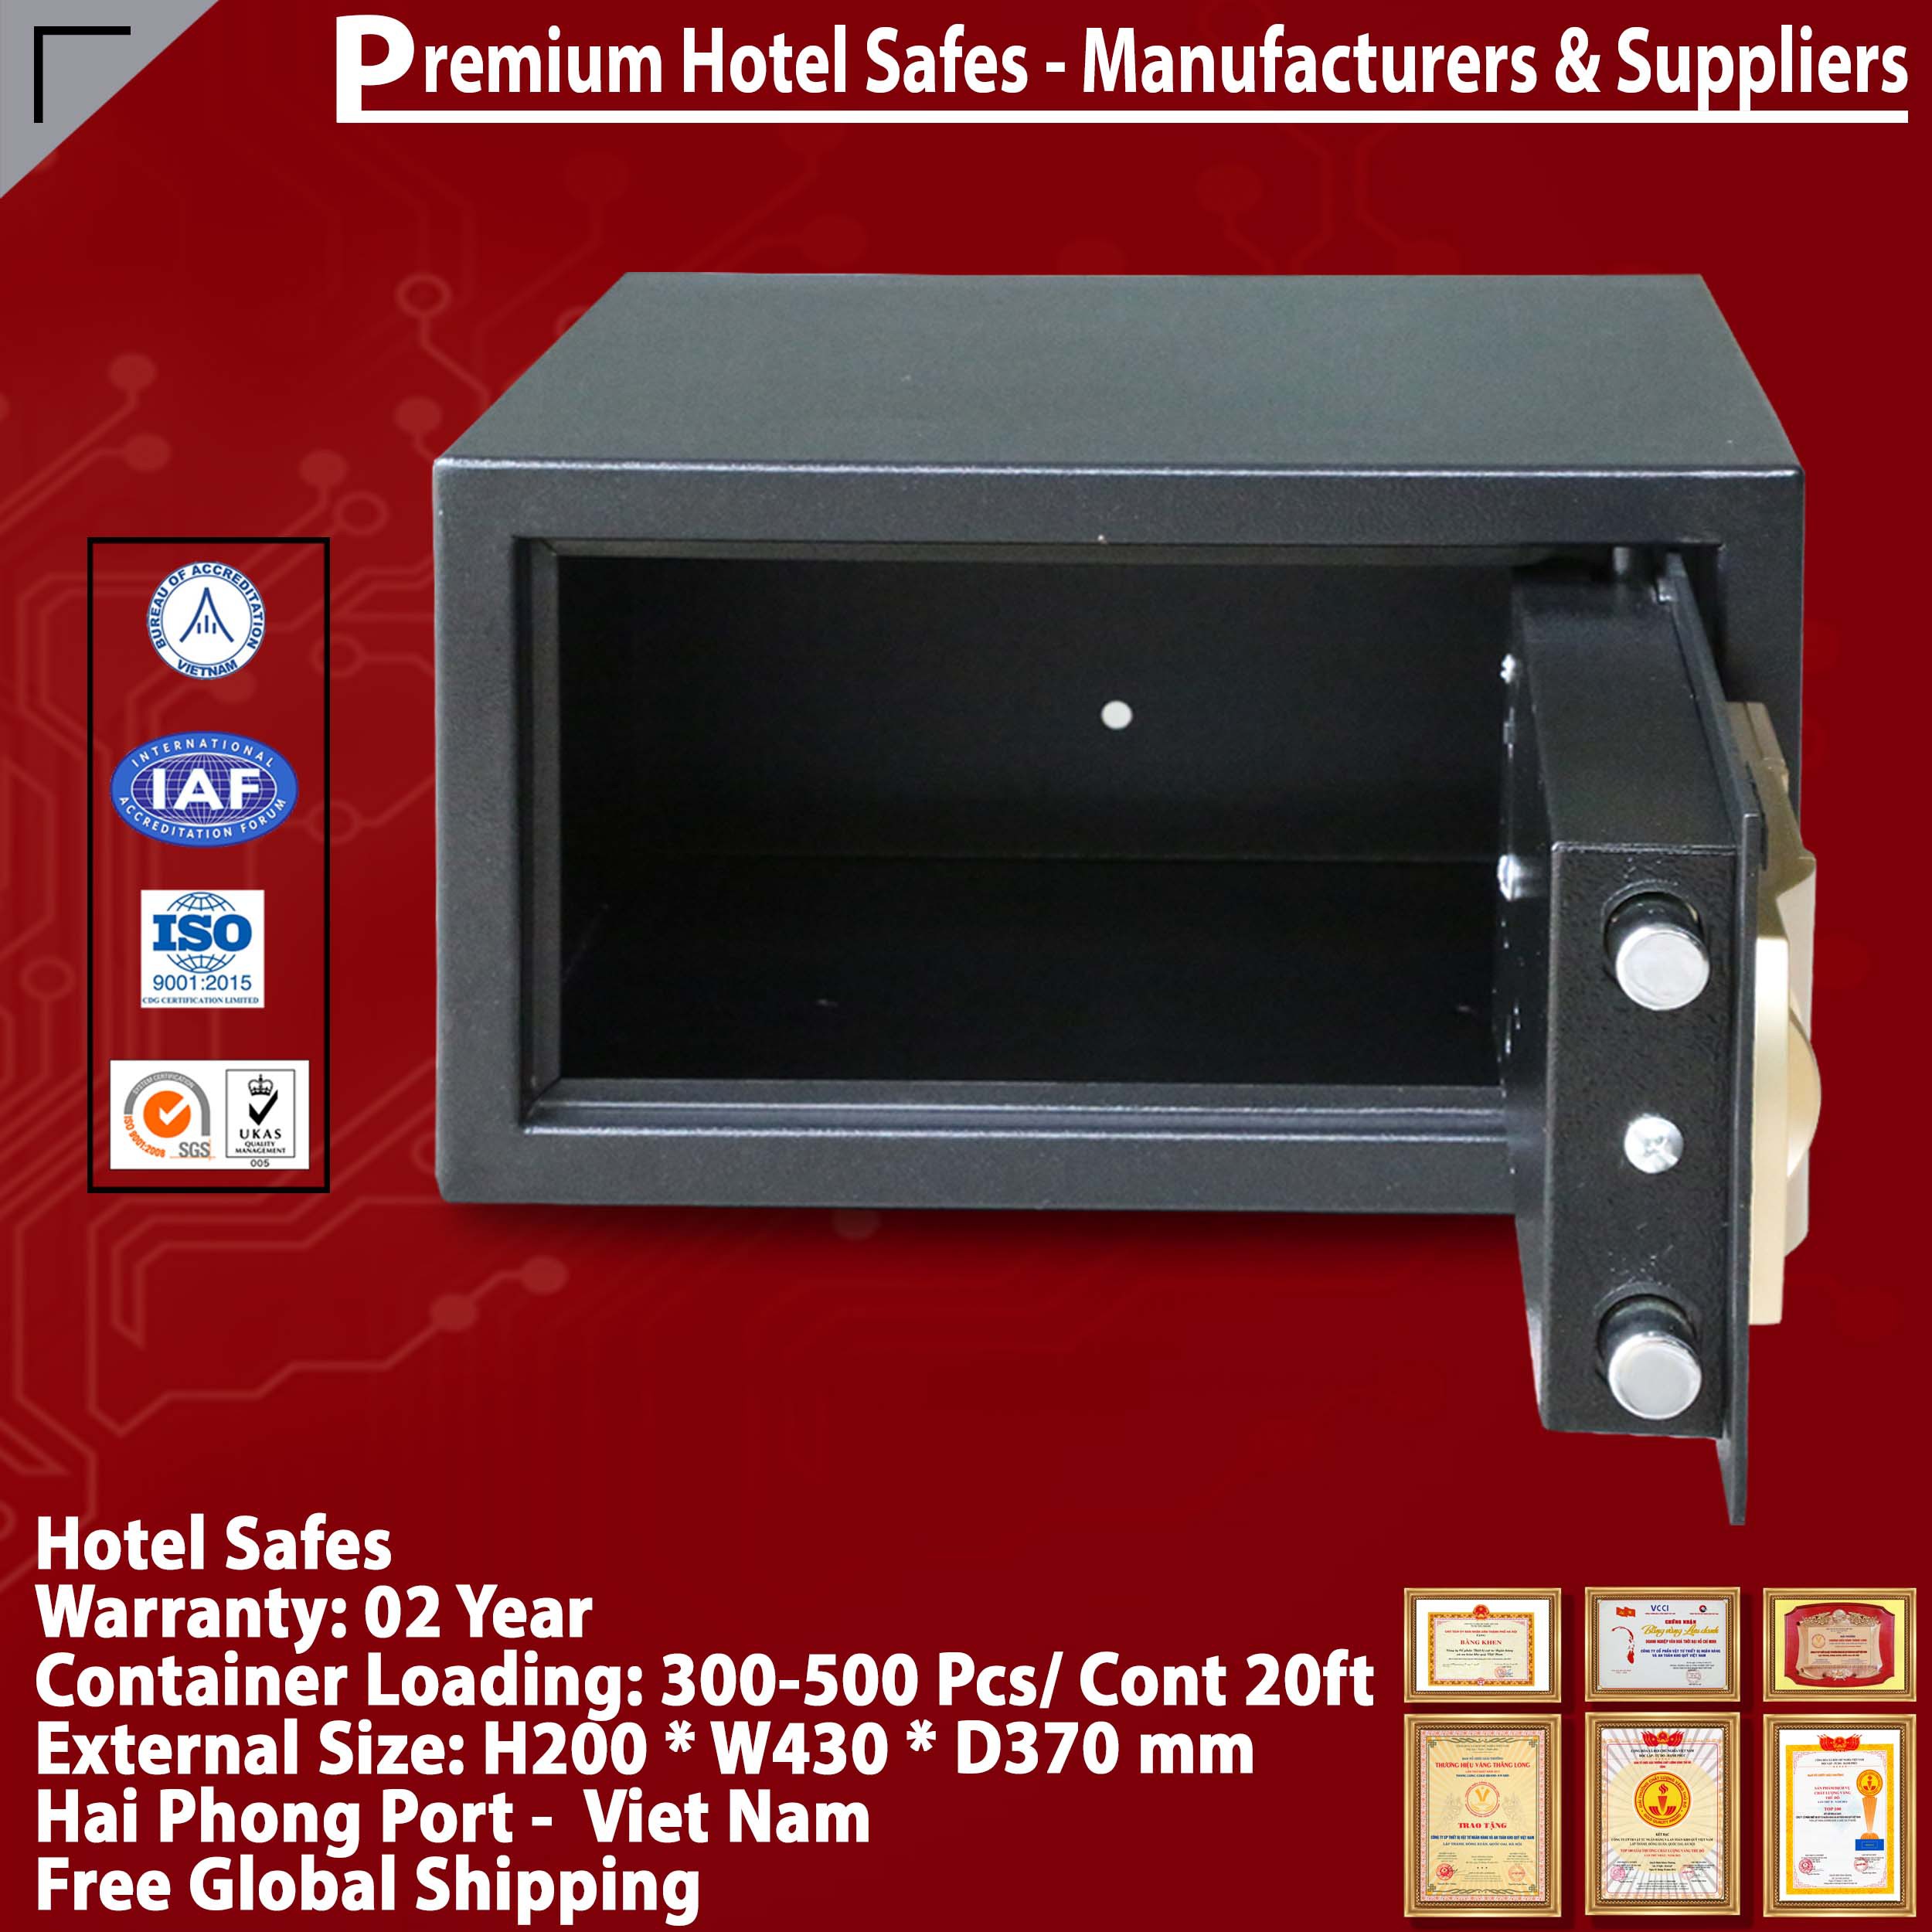 Safes in Hotel Made In Viet Nam